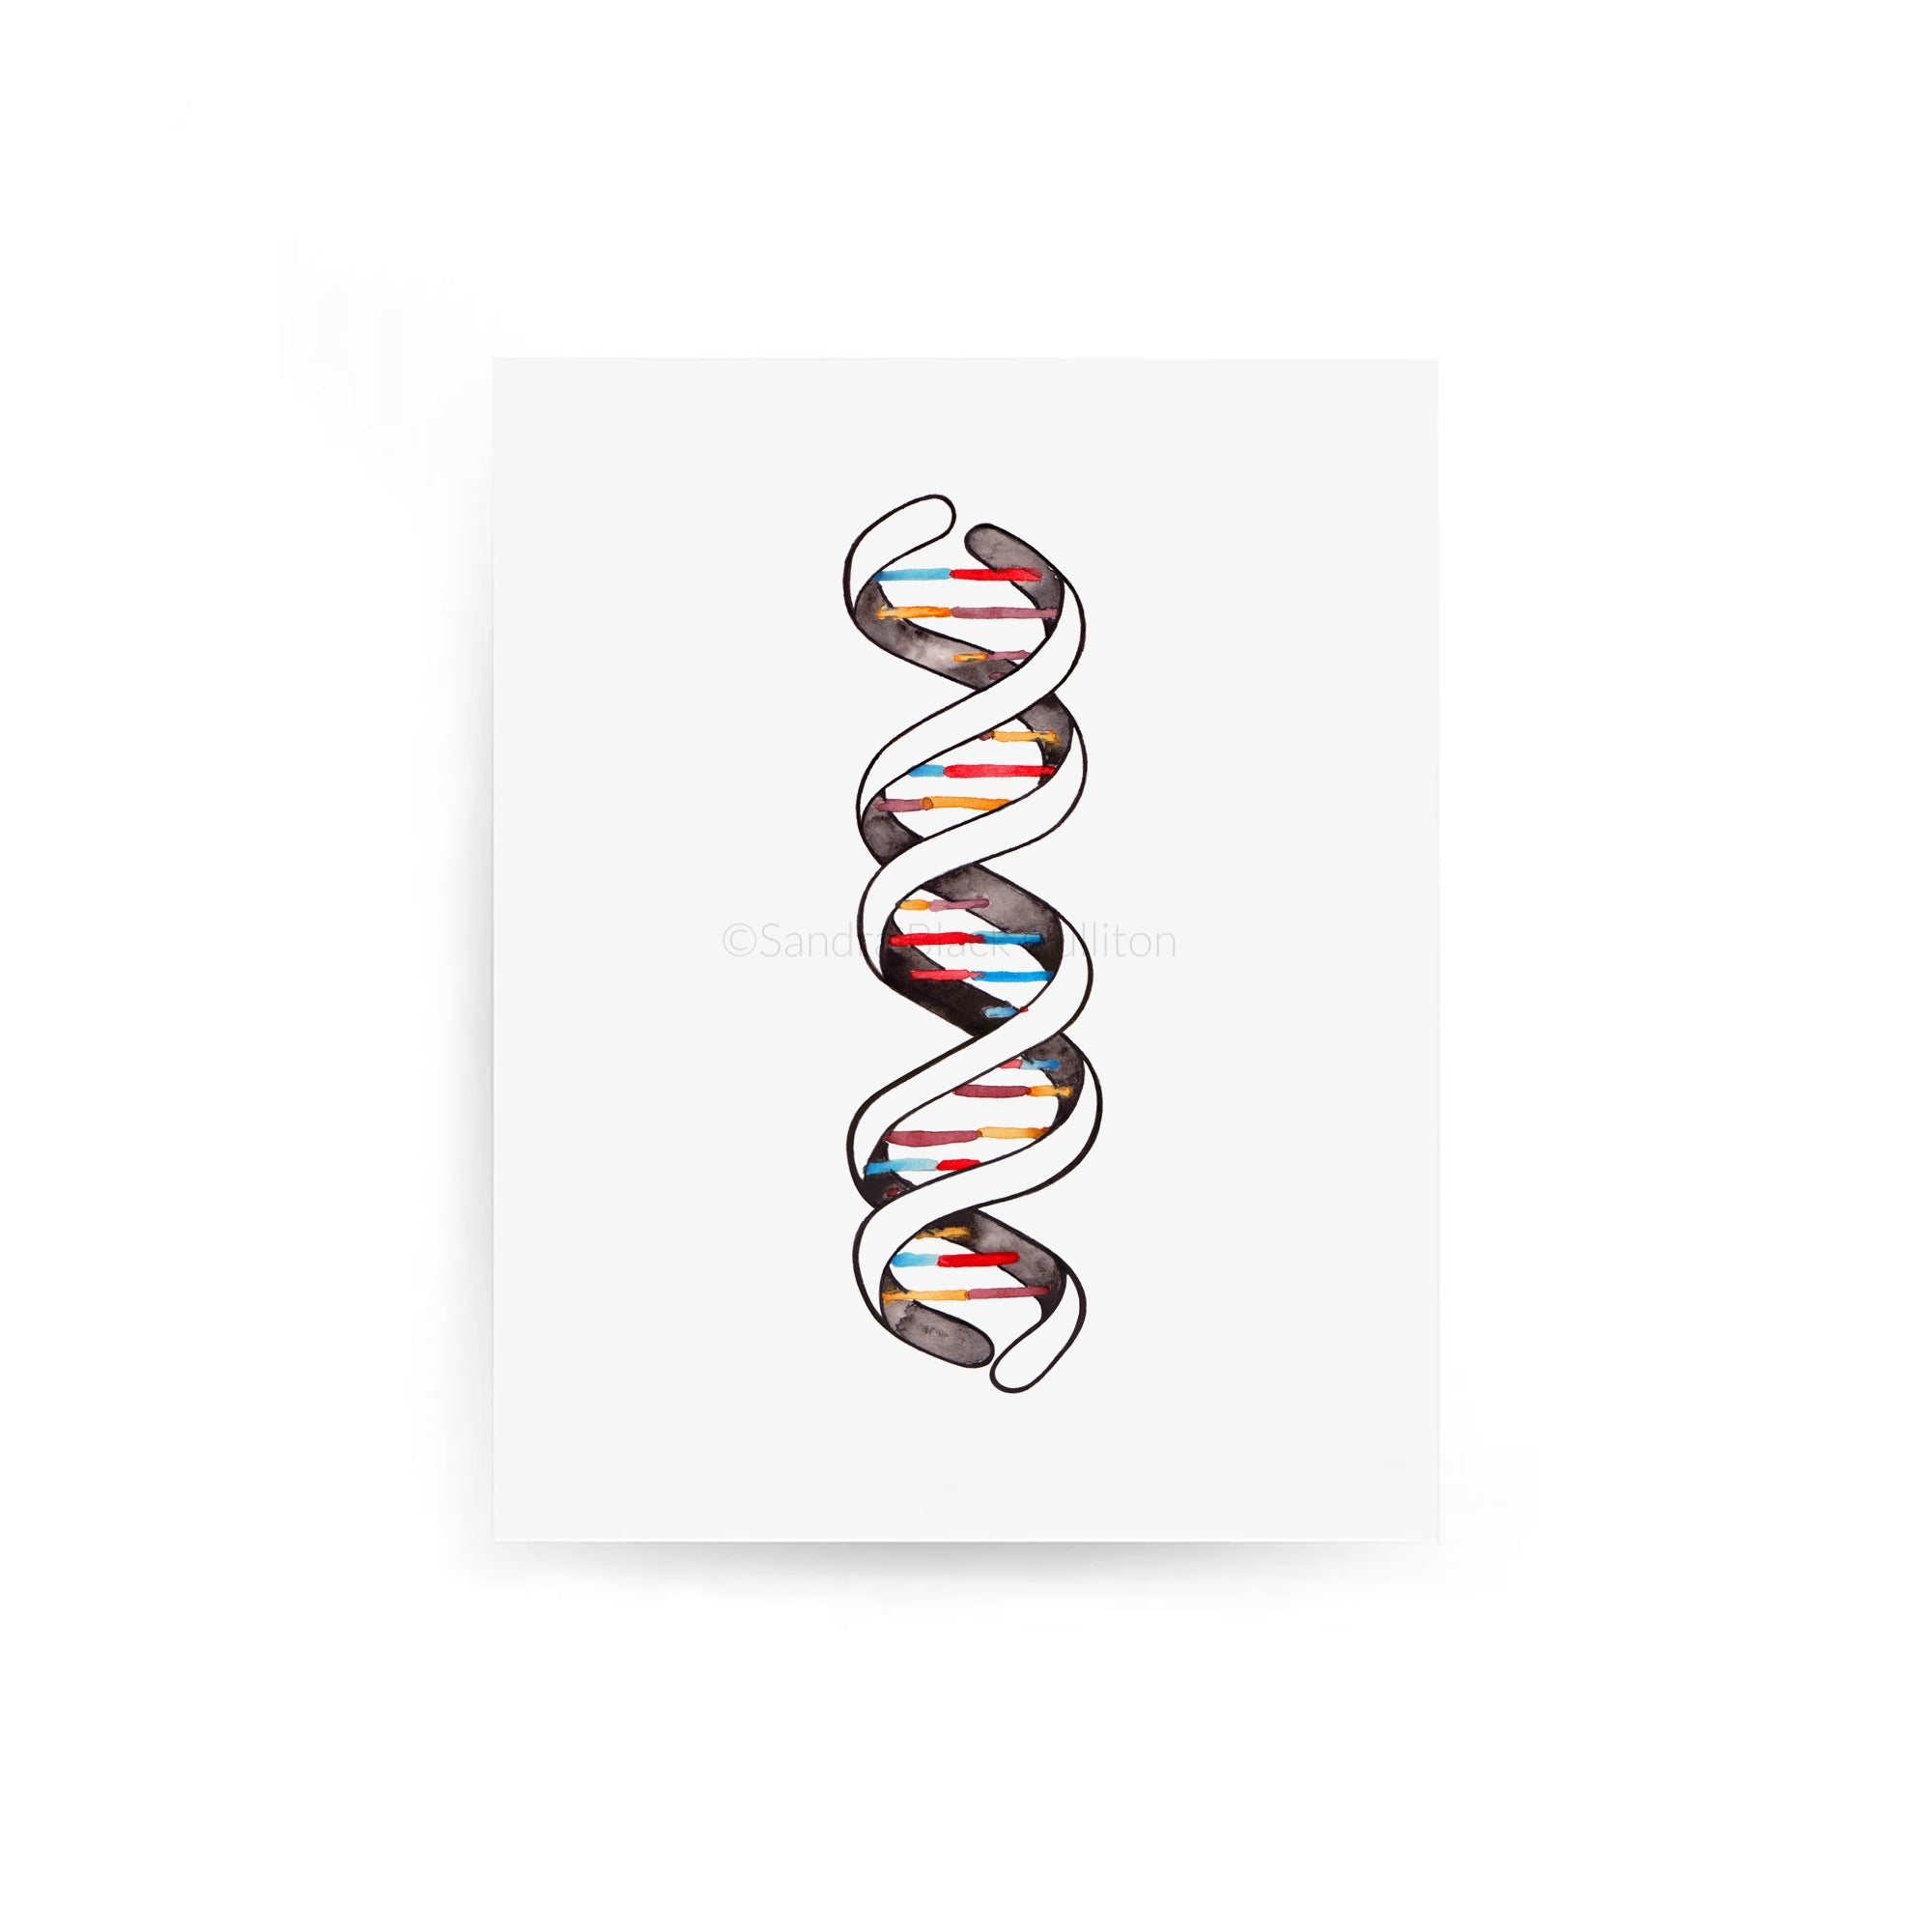 DNA double helix print in light wooden frame.